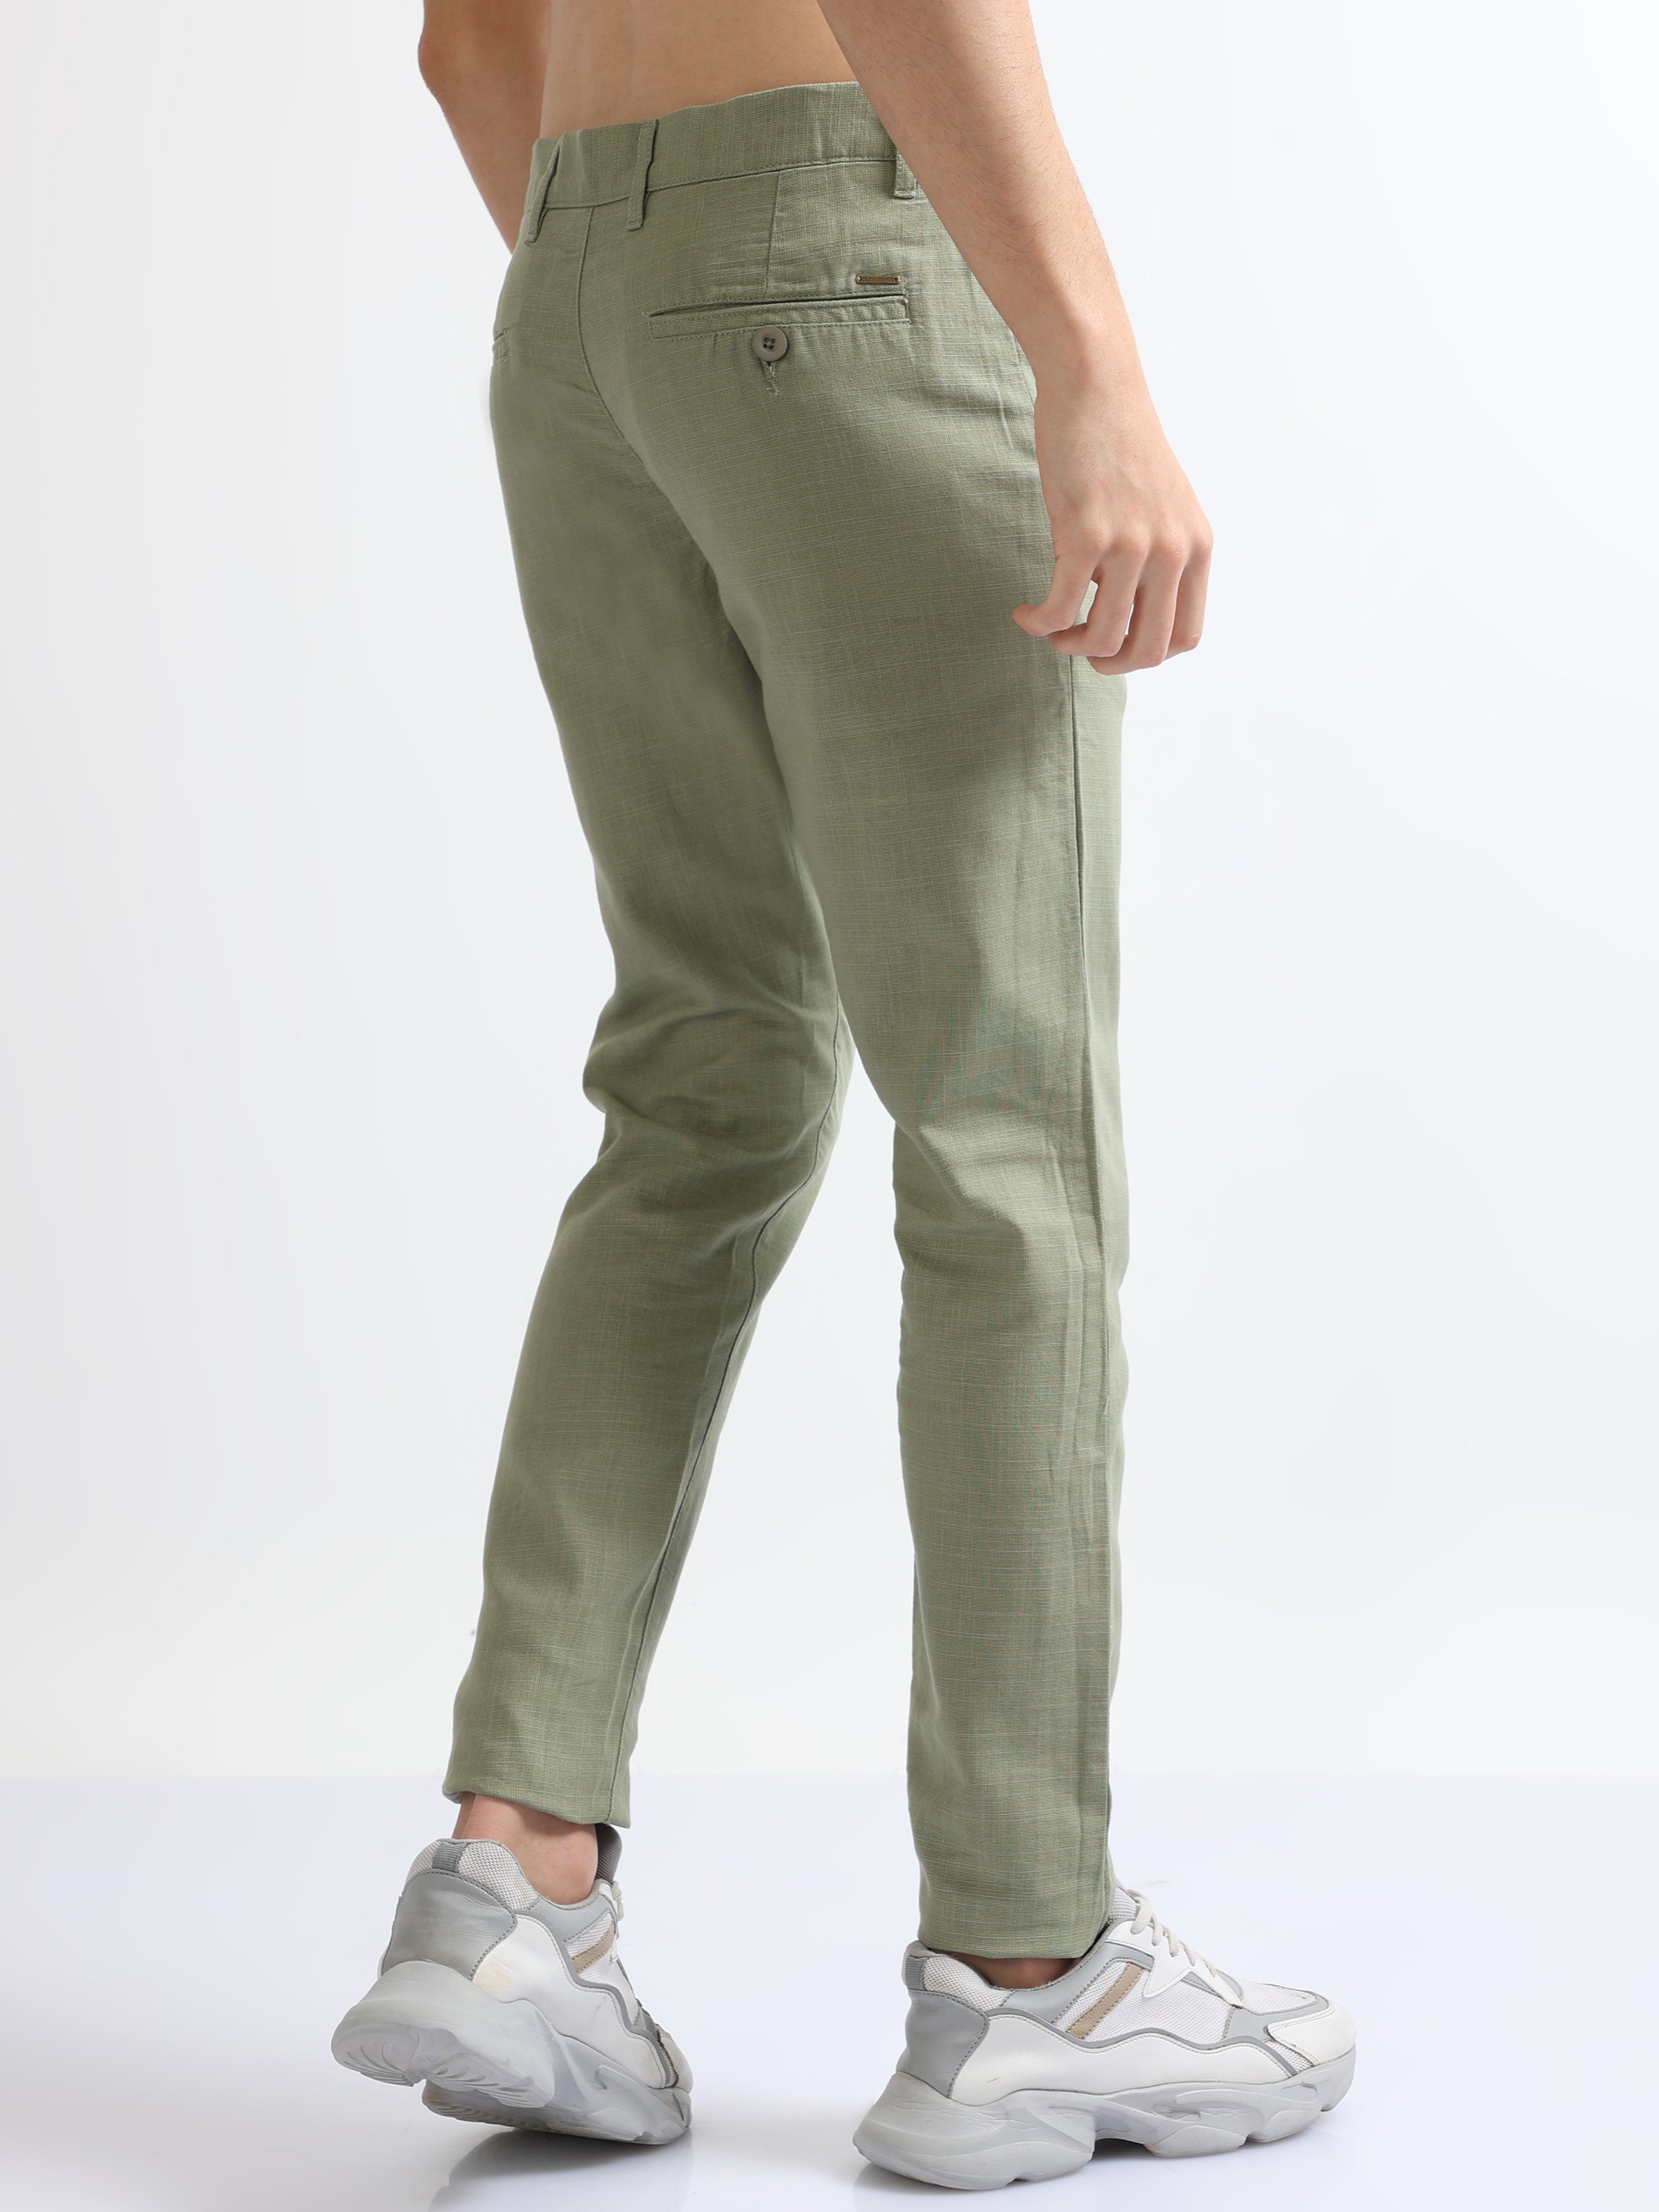 Men's Linen Pants Solid Color Casual Pants Fashion Straight-Leg Trousers  Baggy Pants With Pockets Drawstring Elastic Waist Design Beach Pants Daily  Yoga Cotton Blend Comfort Soft Mid Waist Green Whit 2024 - £